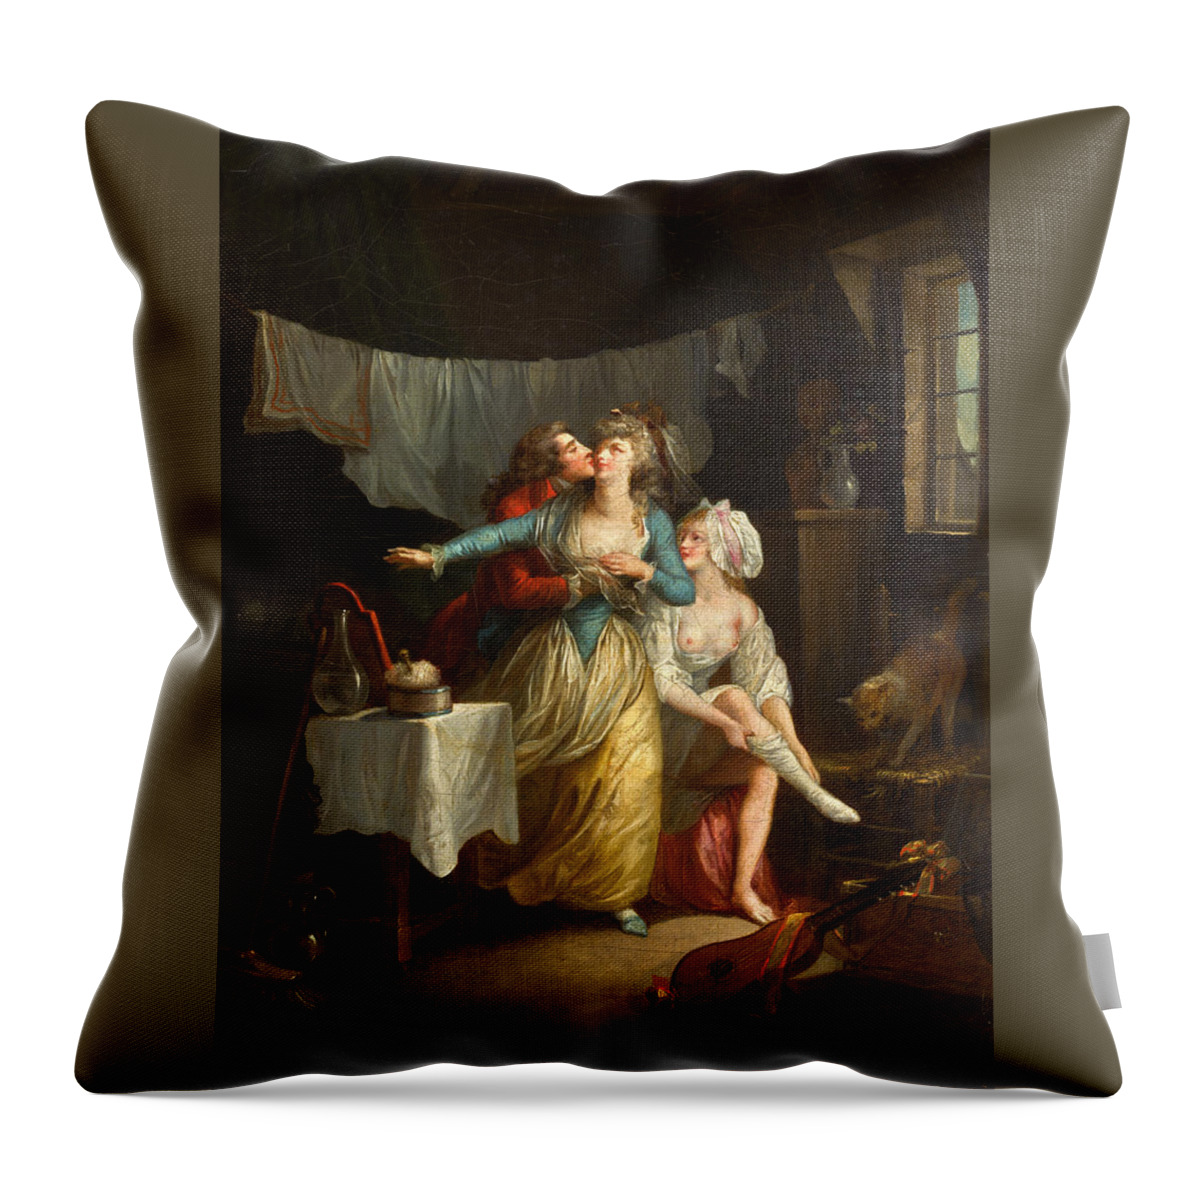 Jean-frederic Schall Throw Pillow featuring the painting An amorous advance in an interior by Jean-Frederic Schall